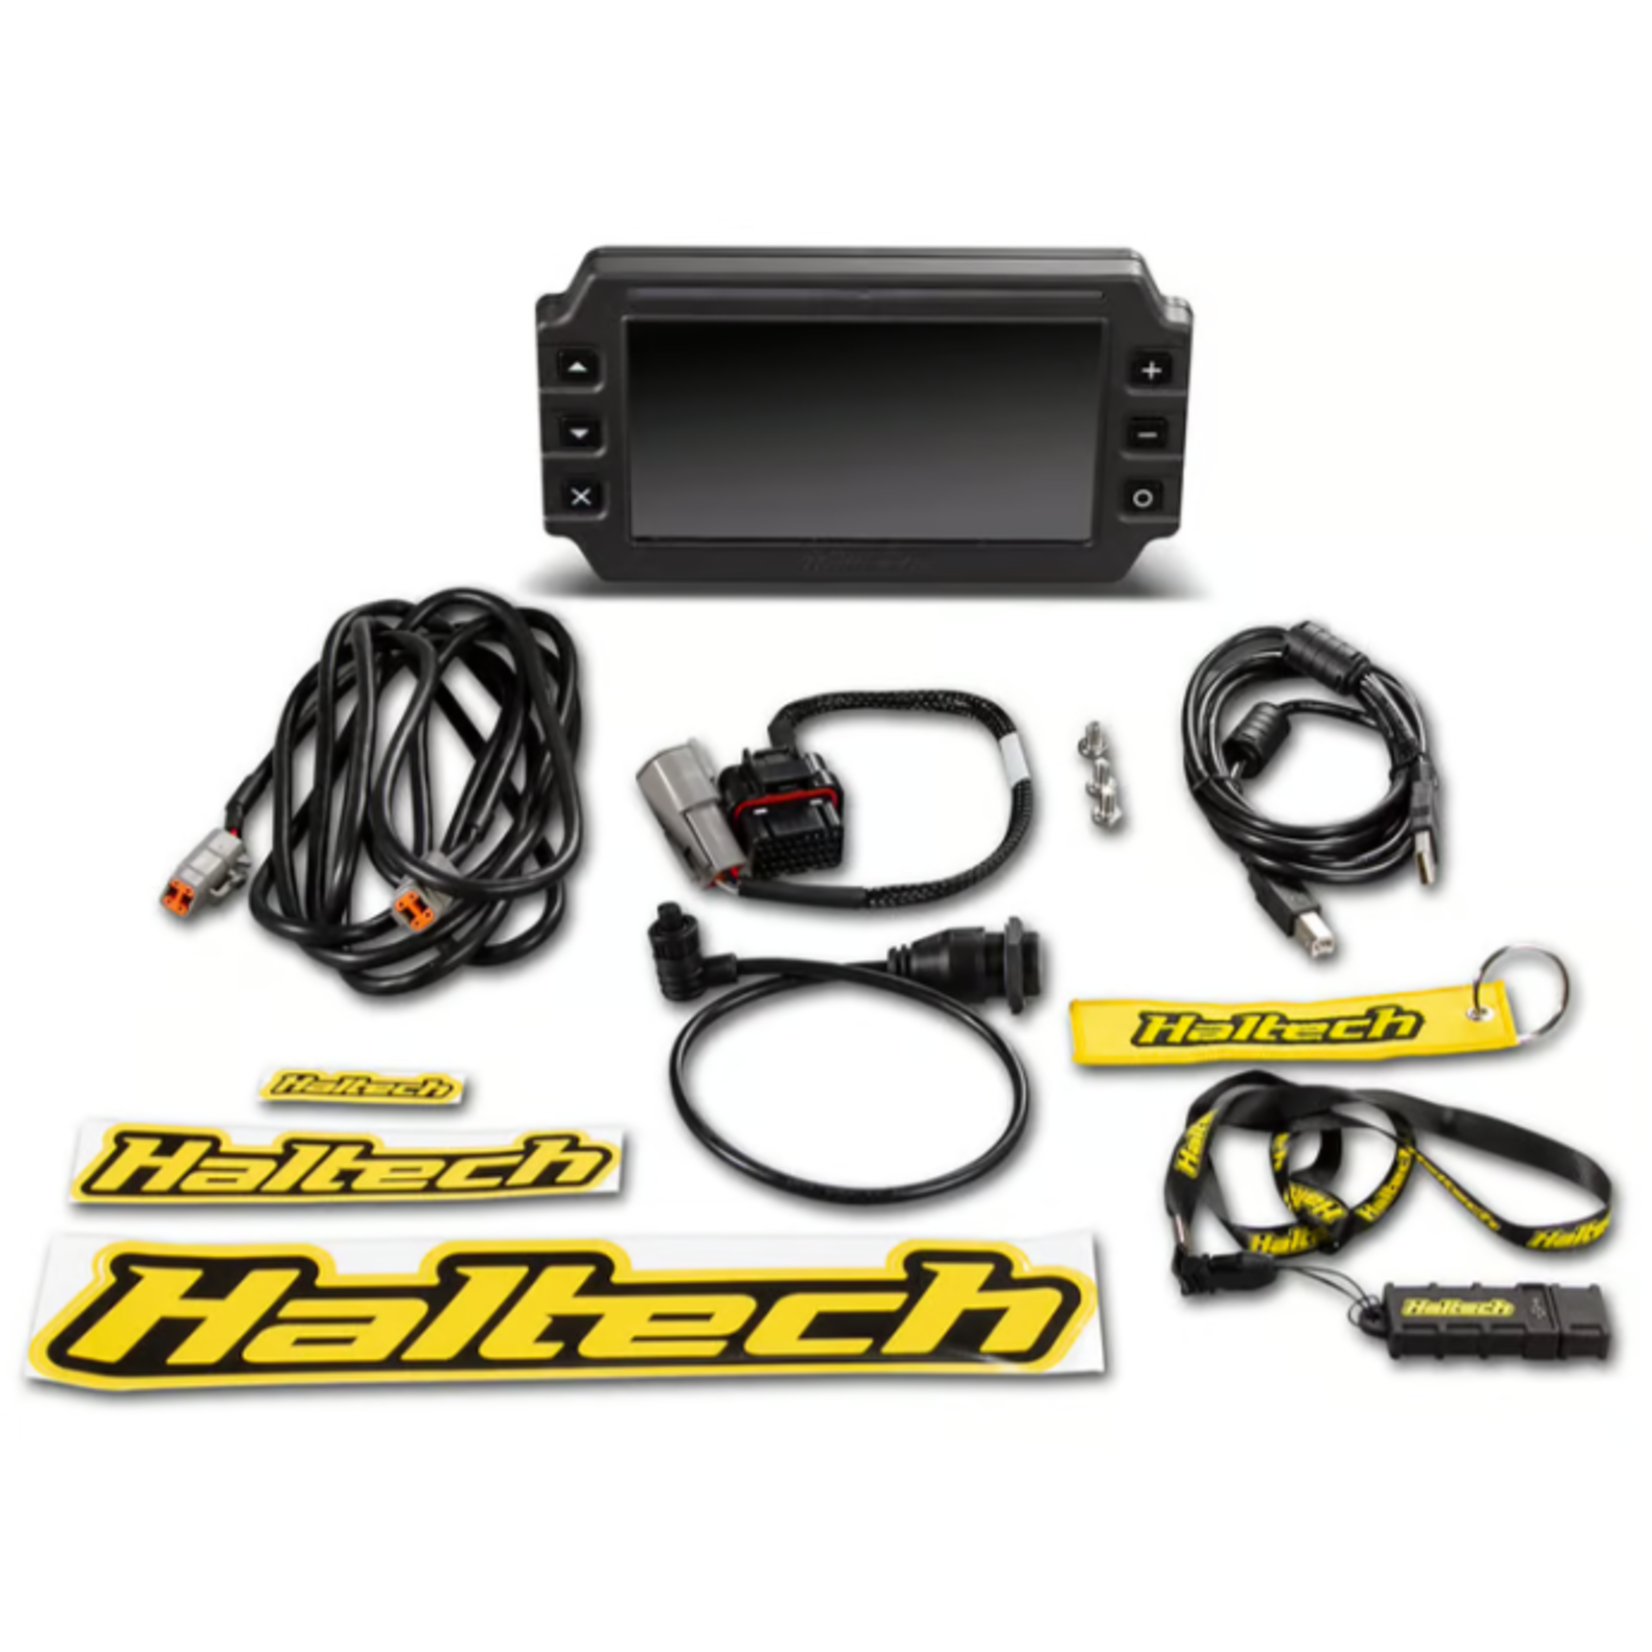 Haltech iC-7 Colour Display Dash Size: 7in